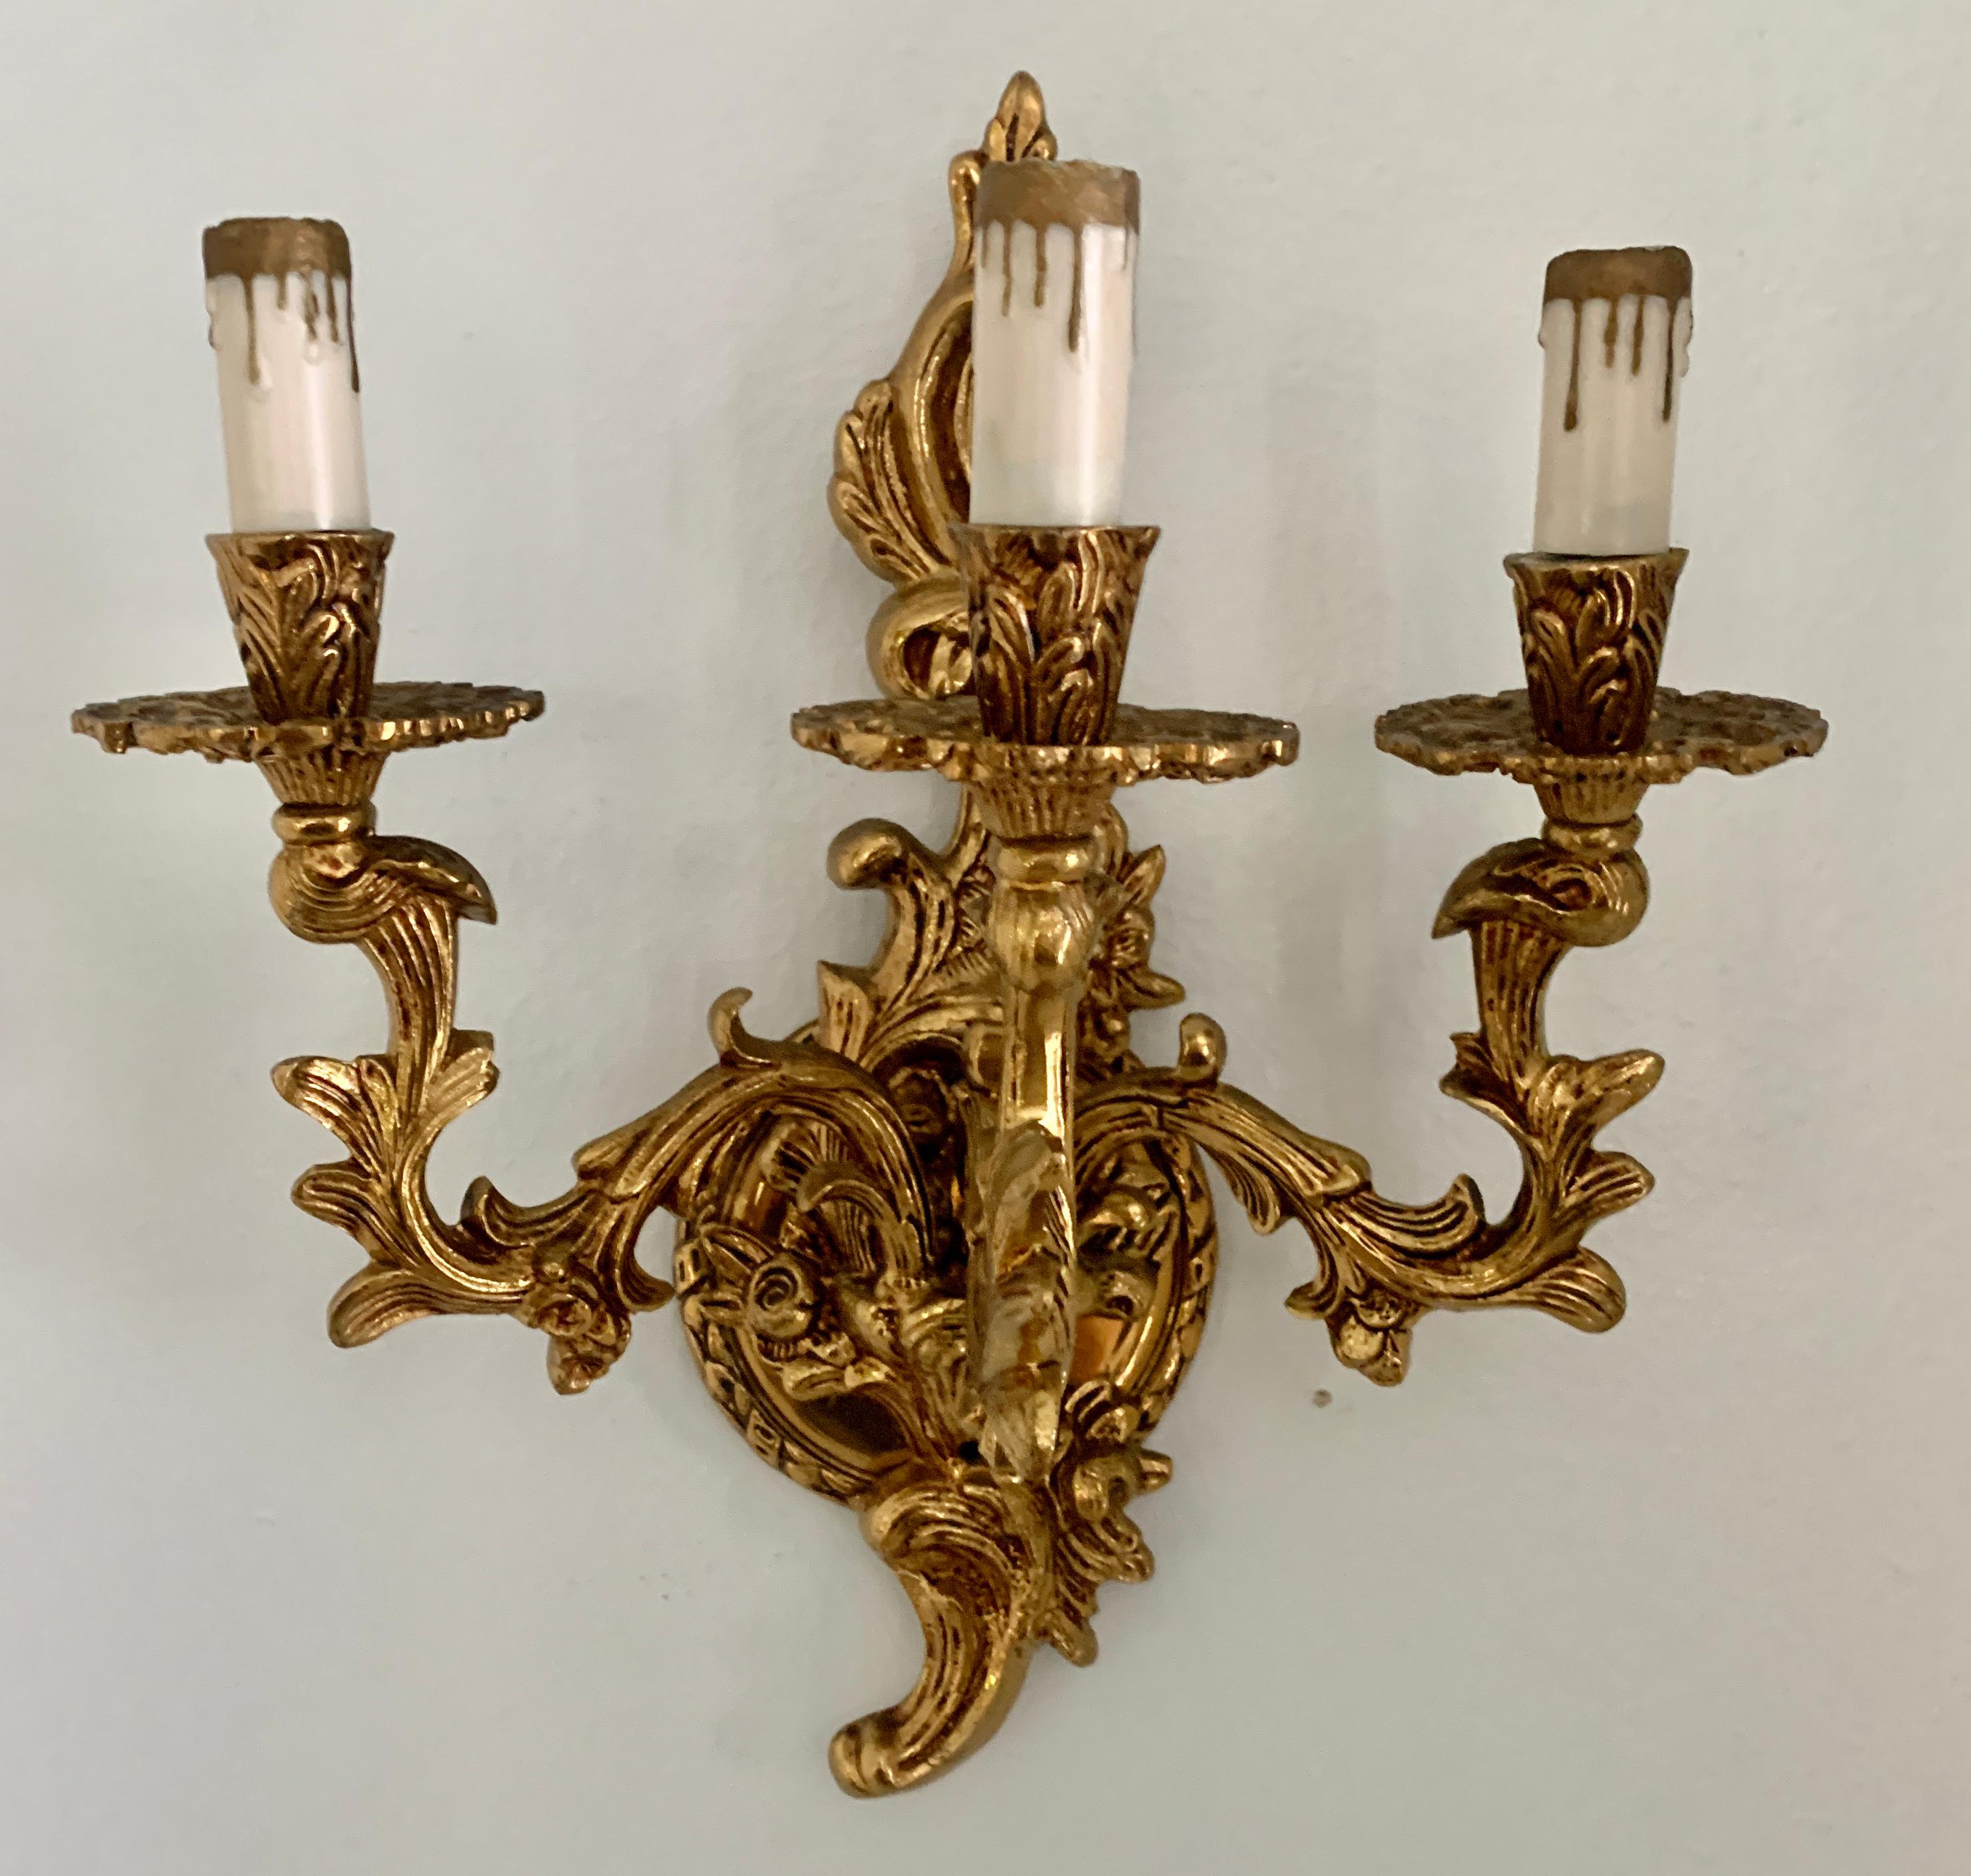 Gilt wall sconce with three lights - the wiring looks to be in good condition and metal all in very good shape...a beautiful replica of a period French piece.